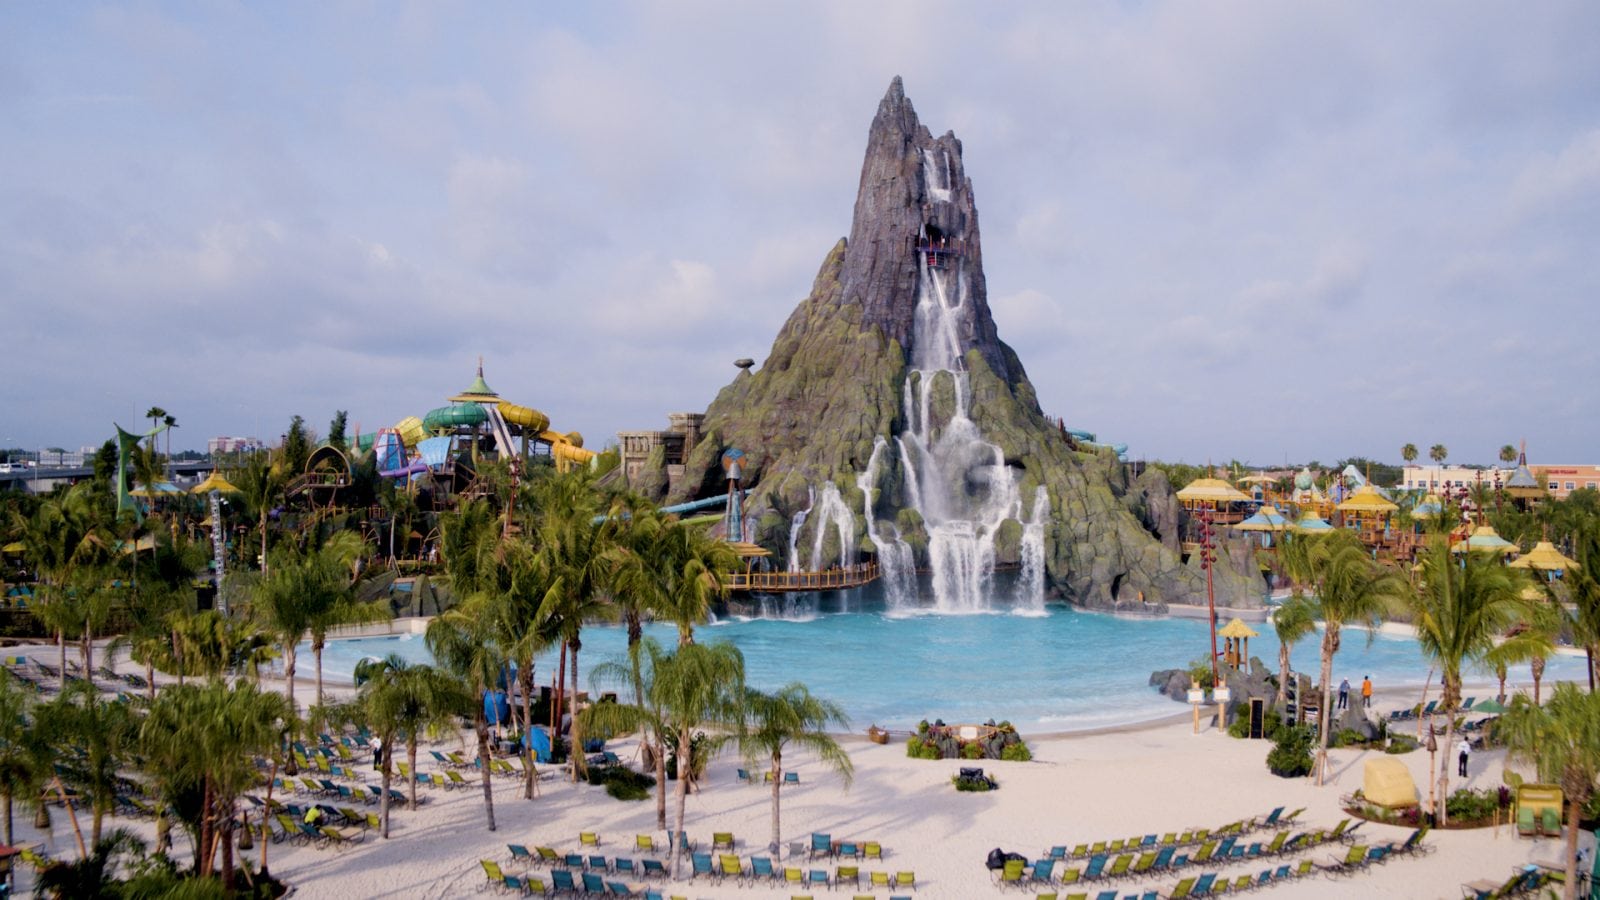 How to deal with crowds at Universal Orlando's volcano bay